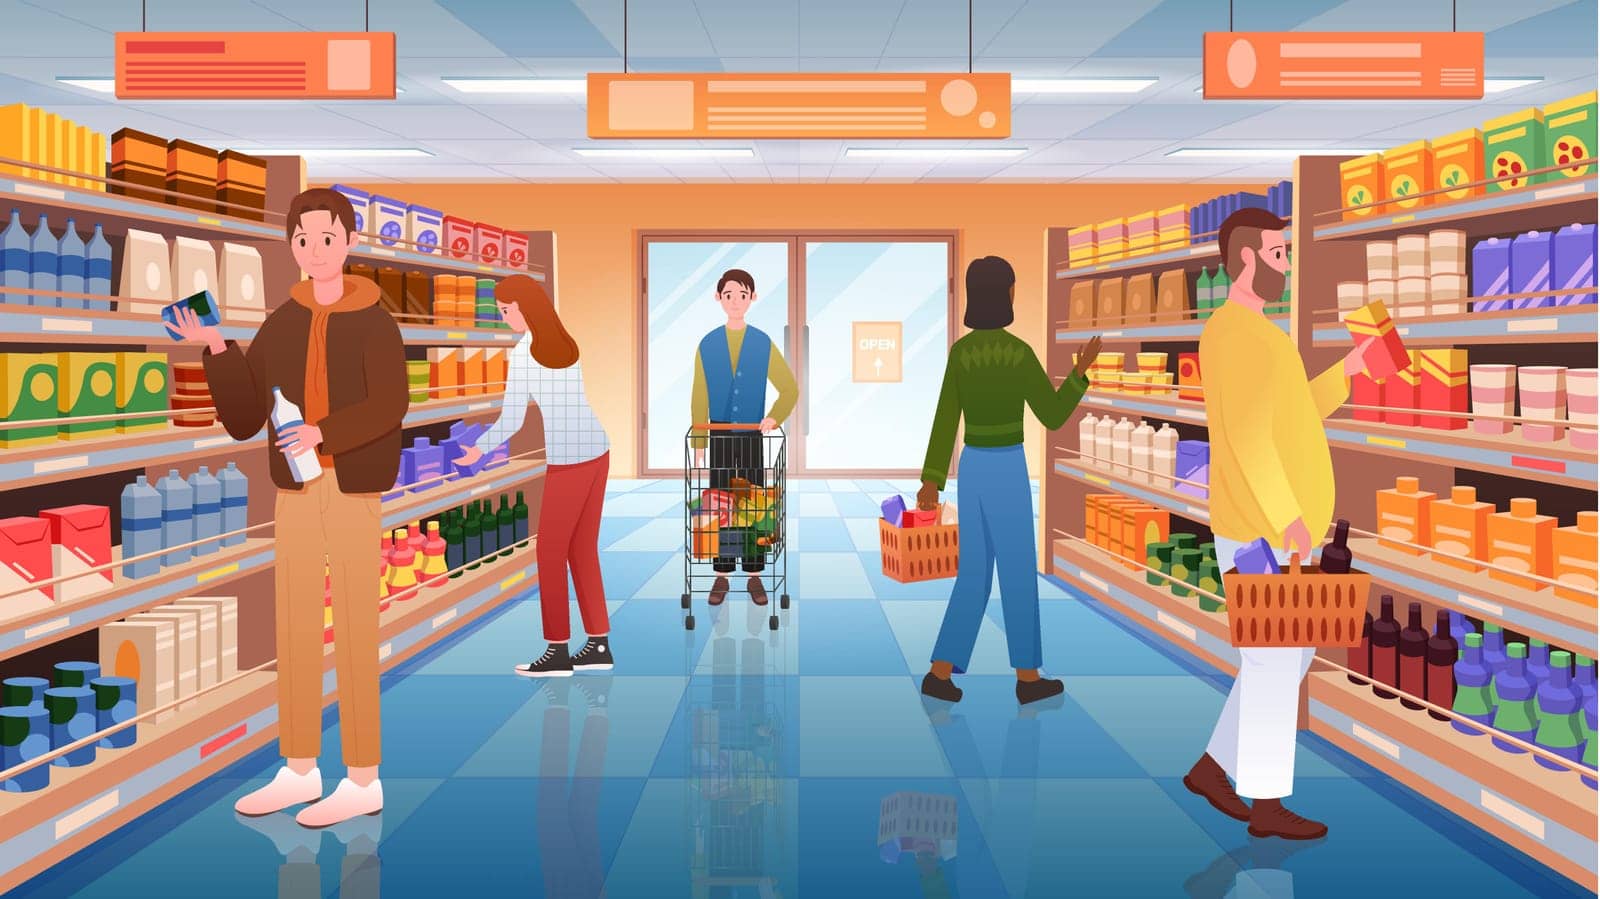 People in aisle of supermarket or grocery store vector illustration. Cartoon man and woman consumers with trolley and baskets standing at shelves to choose food products, buyers characters read labels